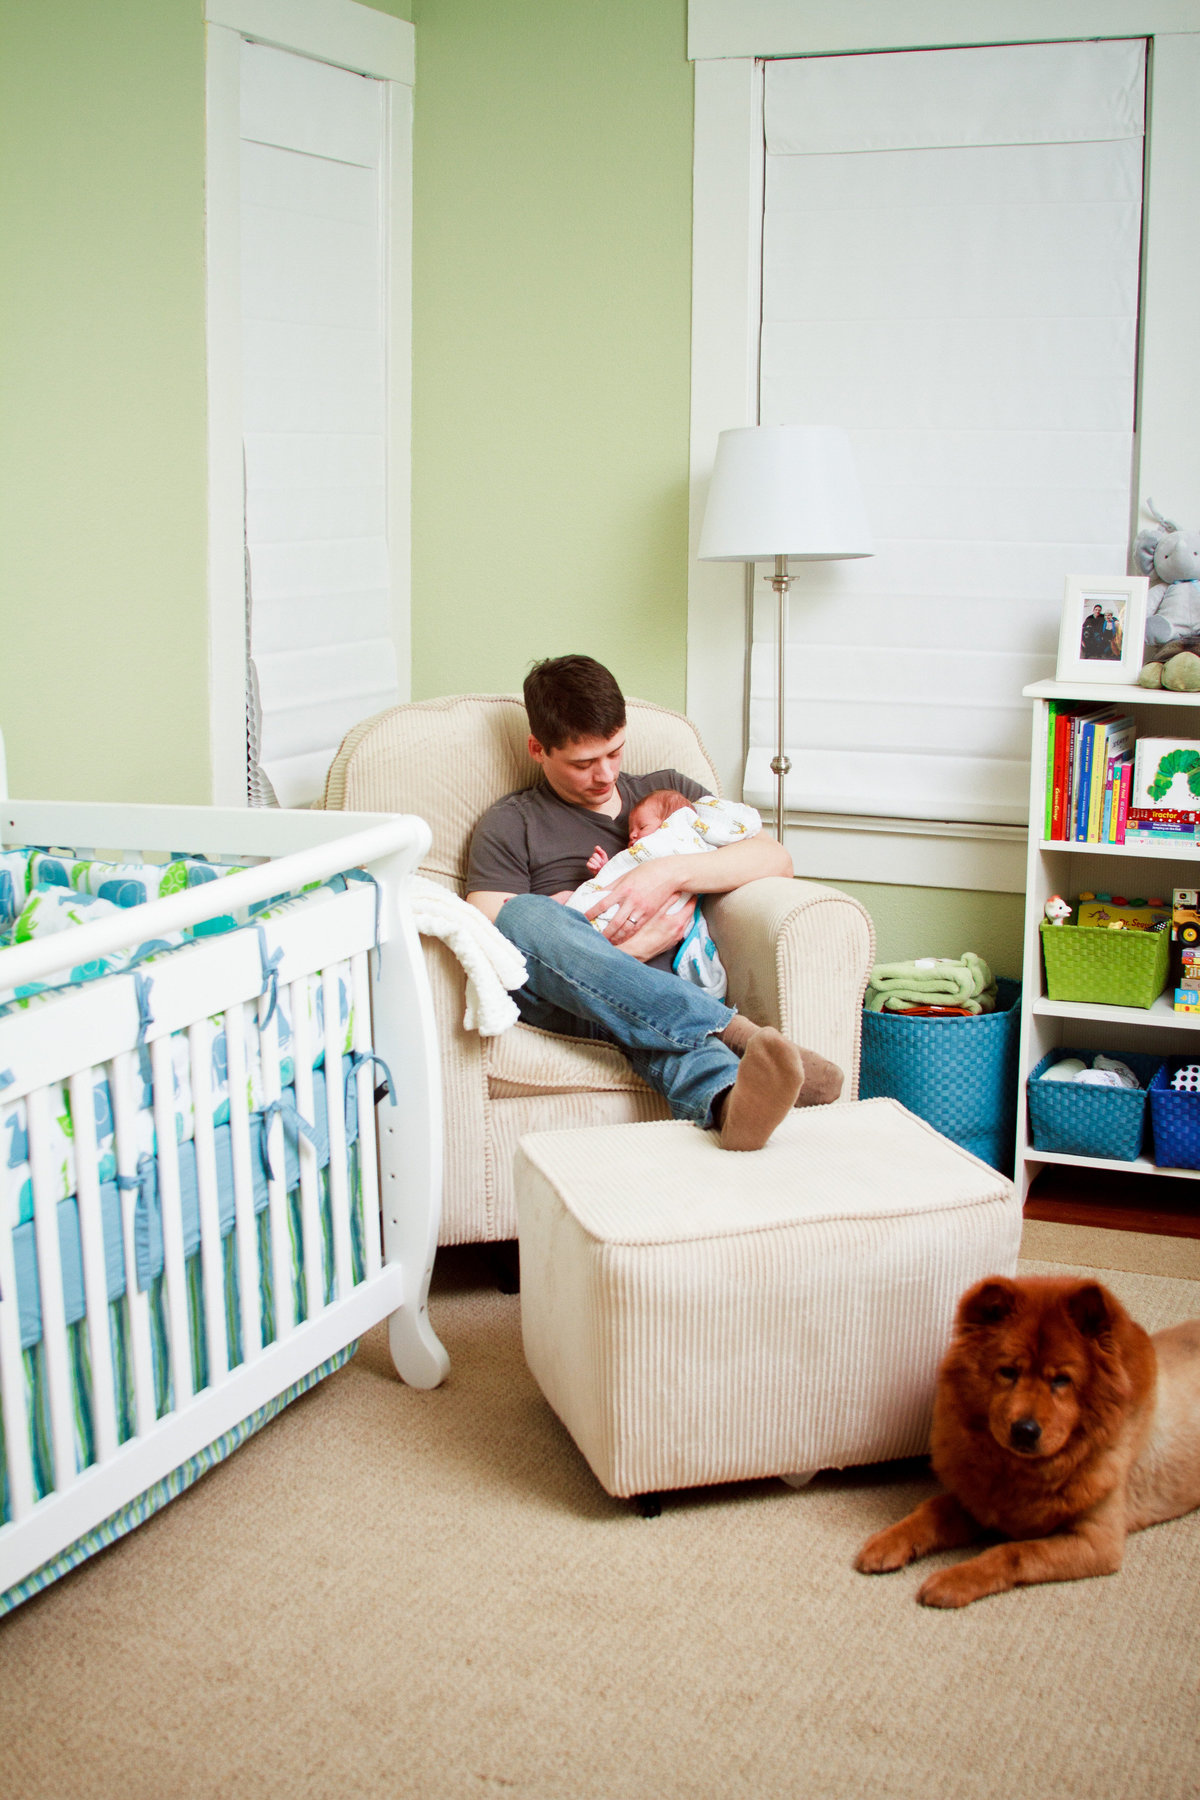 In home newborn photography session in San Antonio with Father, son, and dog in the nursery.